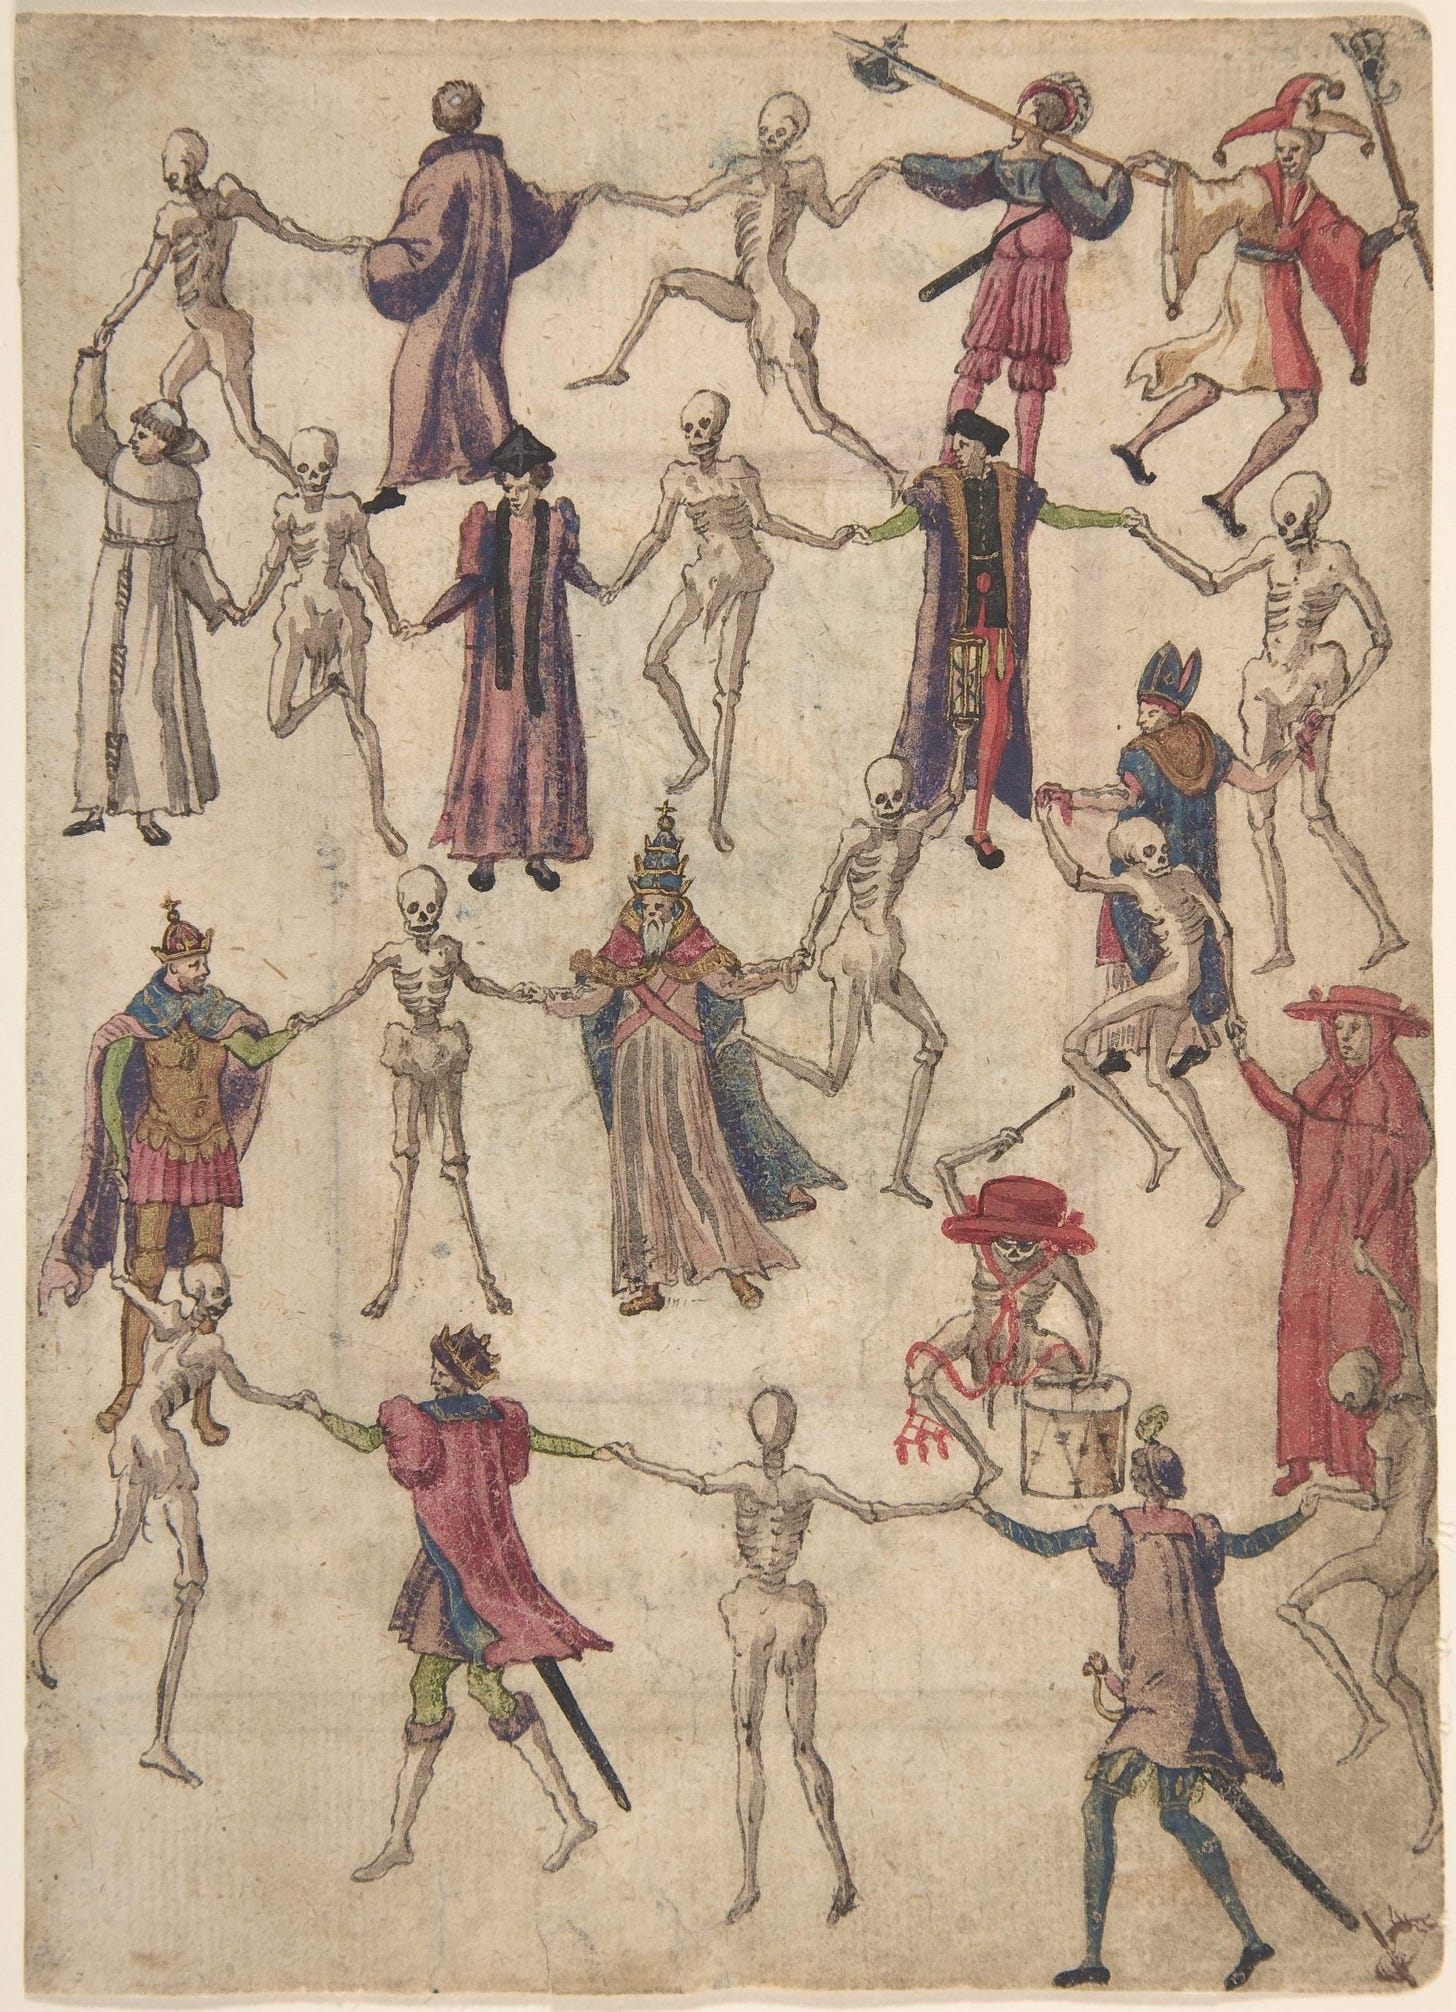 Ink and watercolor drawing of a danse macabre from 16th century Germany with skeletons and people holding hands 